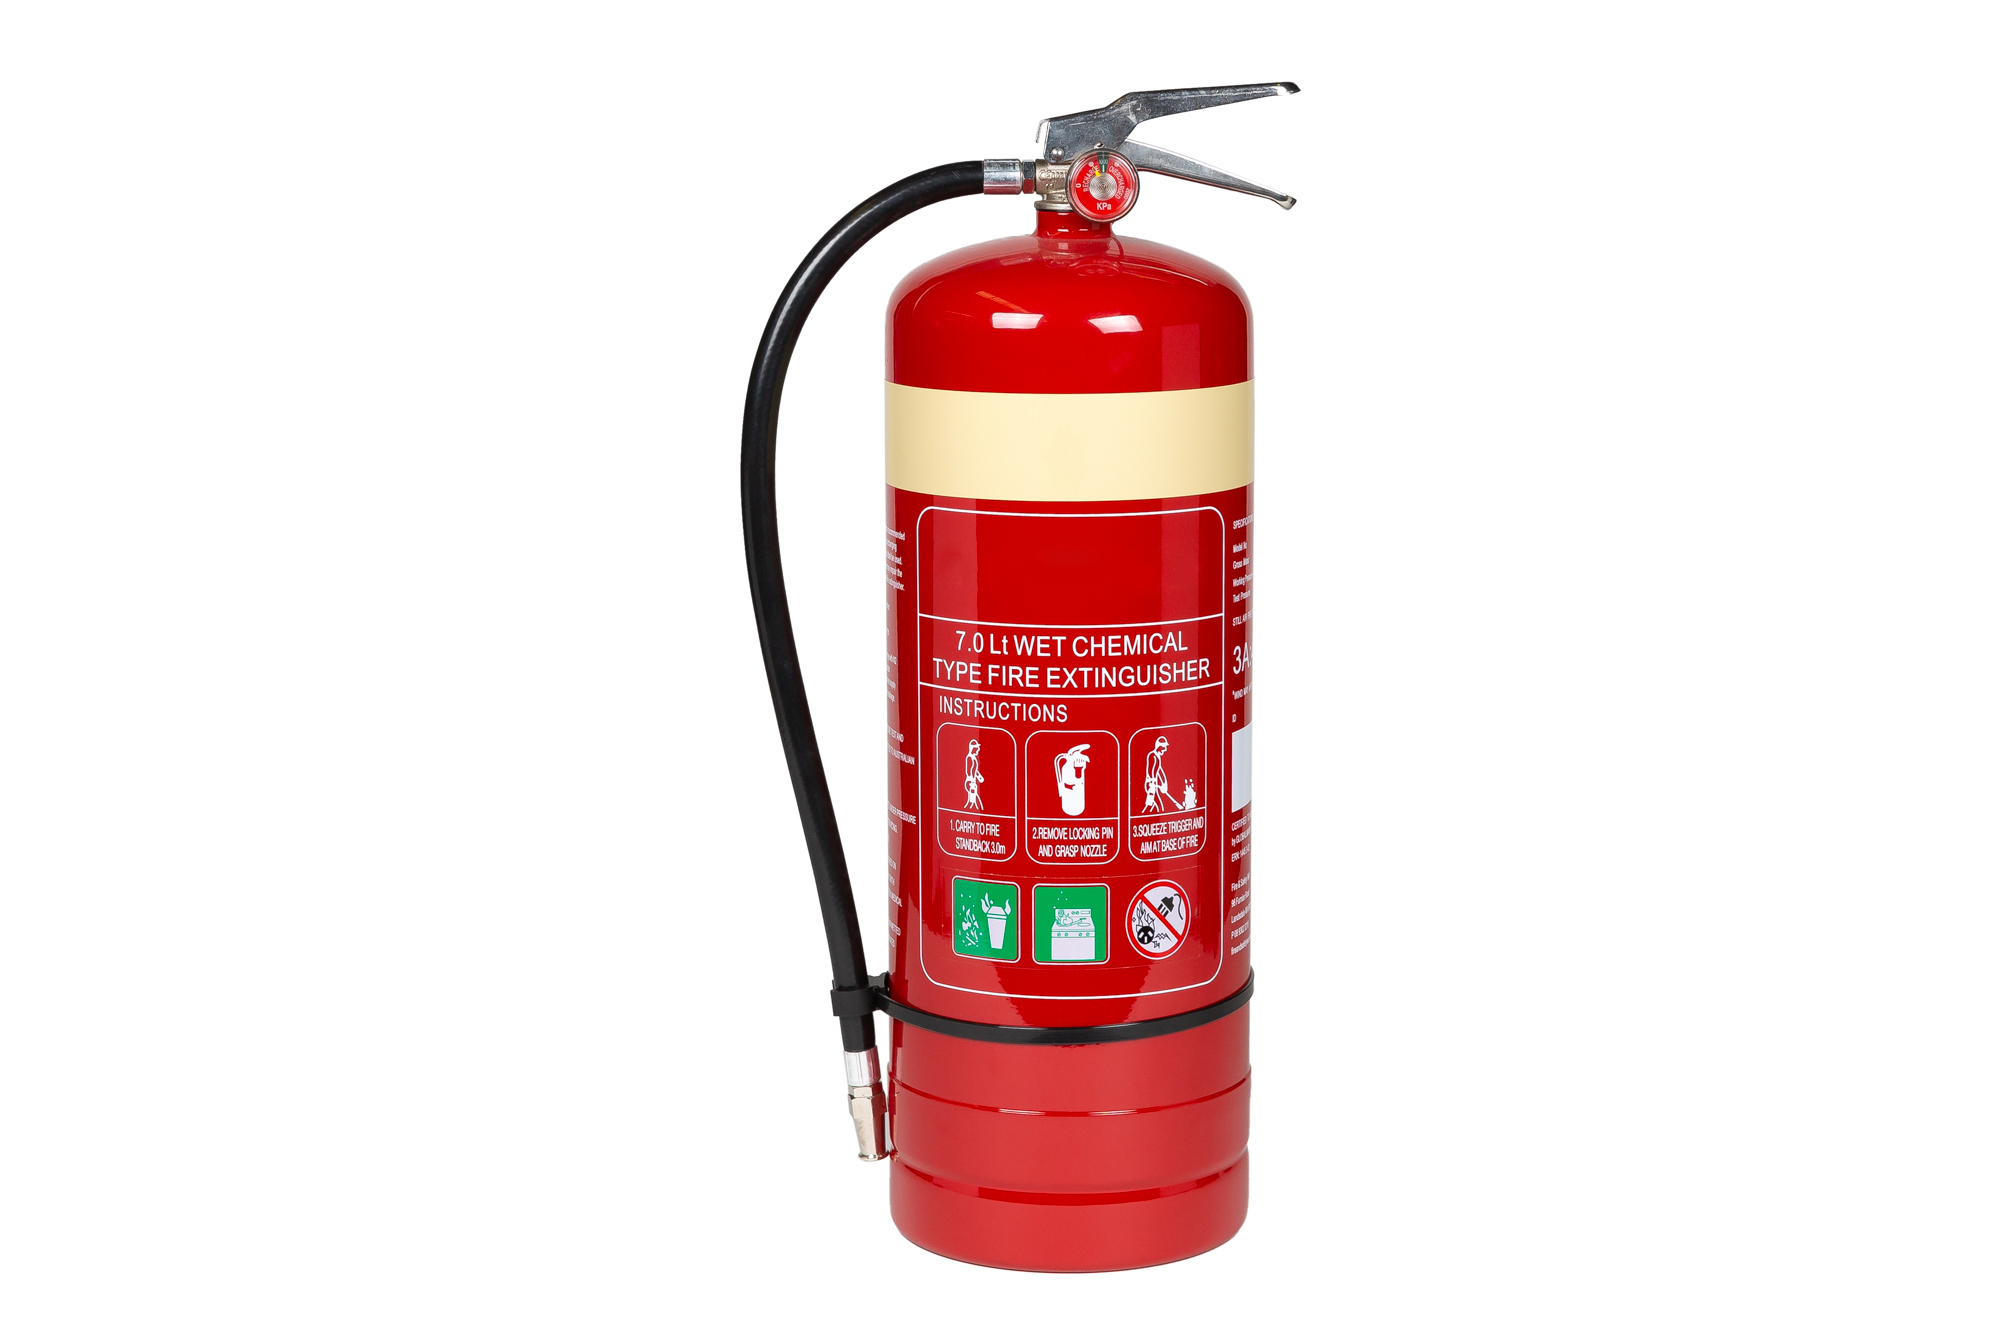 7.0L WET CHEMICAL FIRE EXTINGUISHER